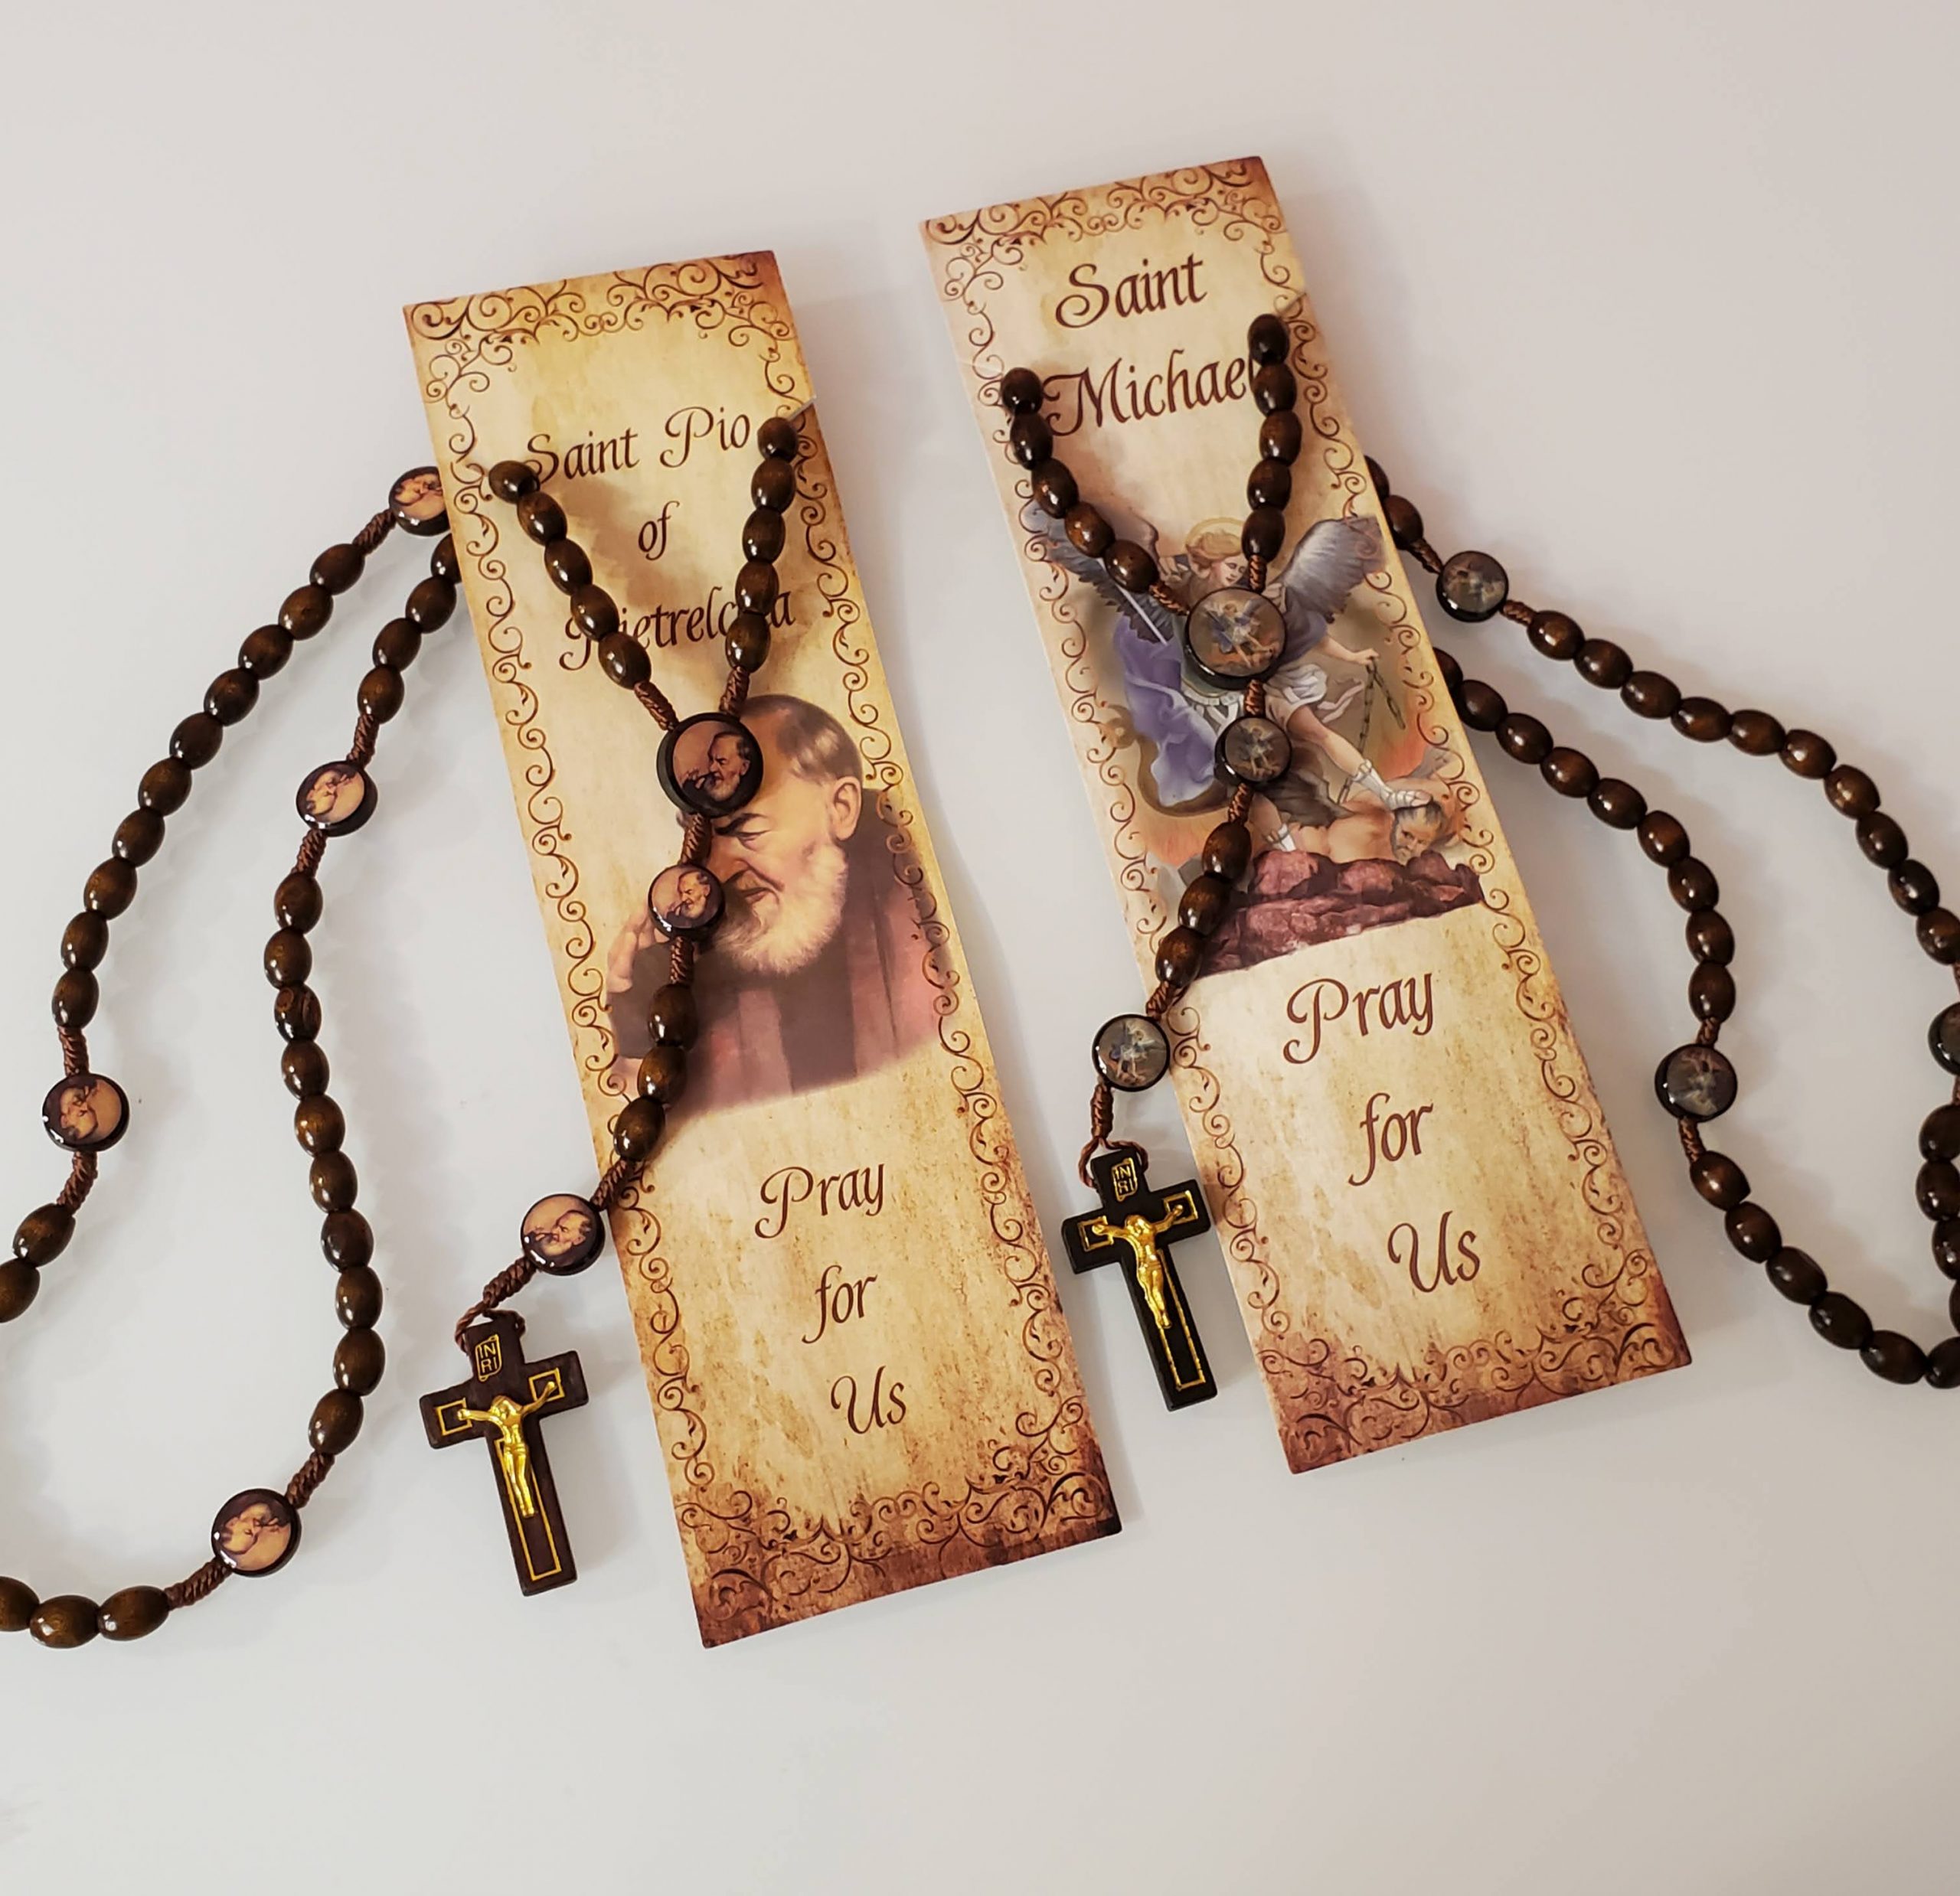 Original Olive Wood Rosary, Prayer Beads, Catholic Rosary, Hand Made  Bethlehem Rosary, Wooden Rosary, Our Father Rosary Beads : Amazon.in: Home  & Kitchen